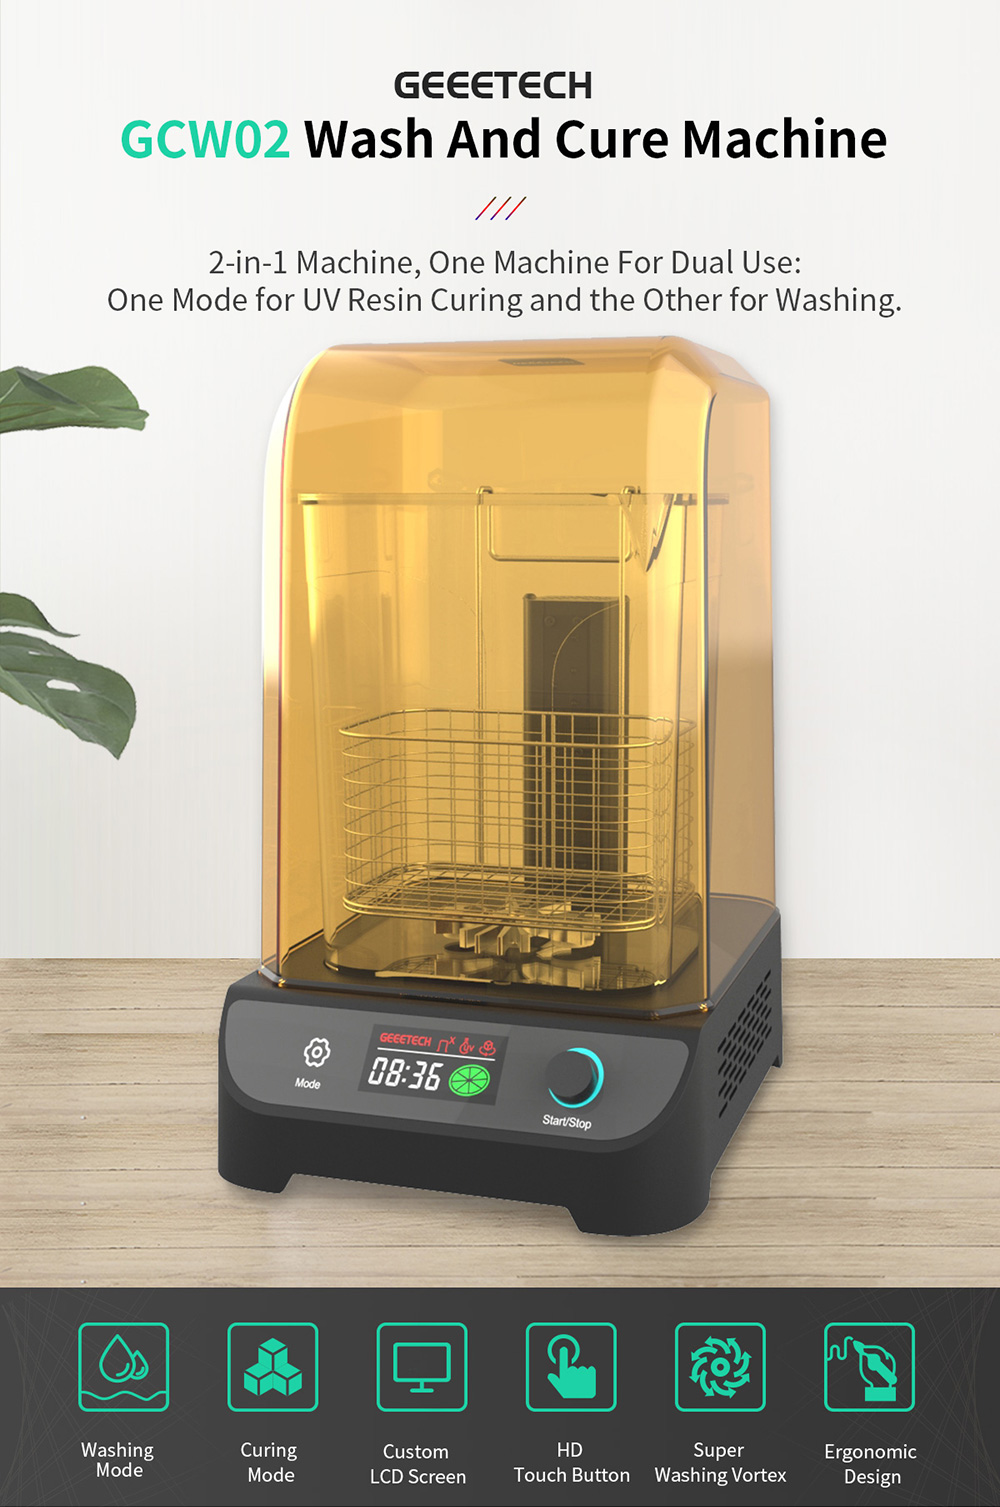 Ackitry Resiners Resin Curing Machine with Larger Tray for Resin